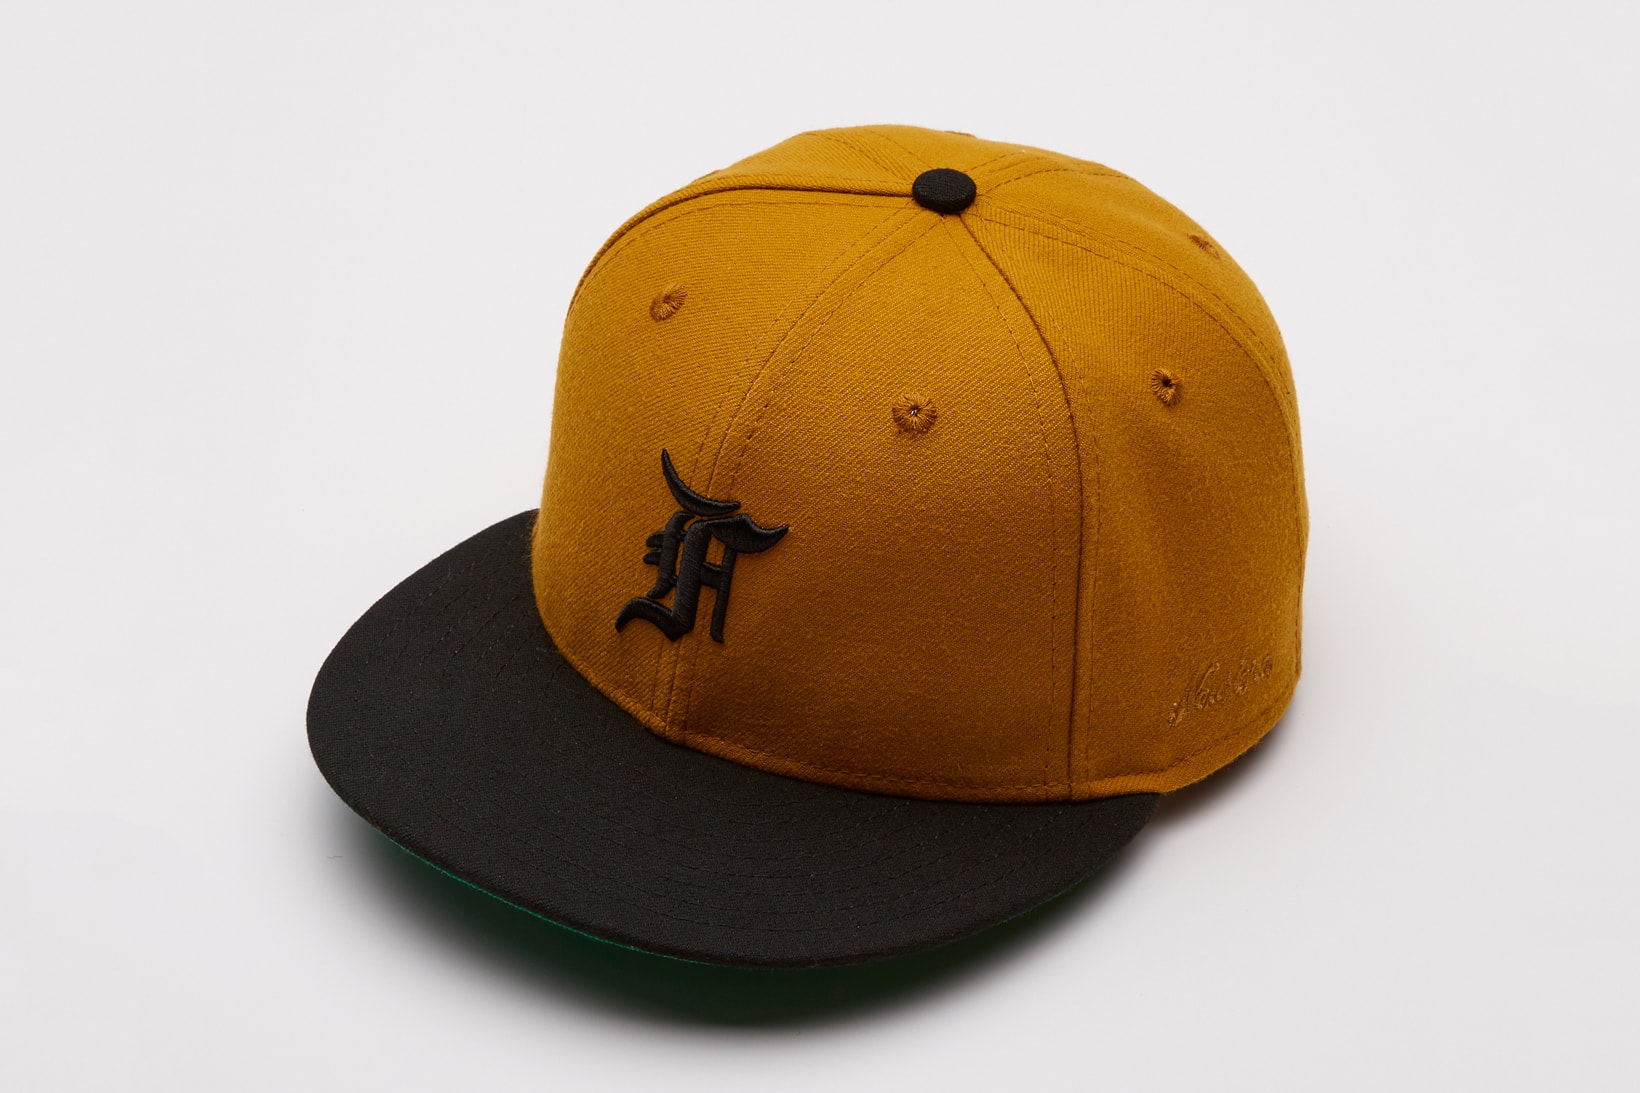 New Era Cap - Rep Houston culture in style with the Official On